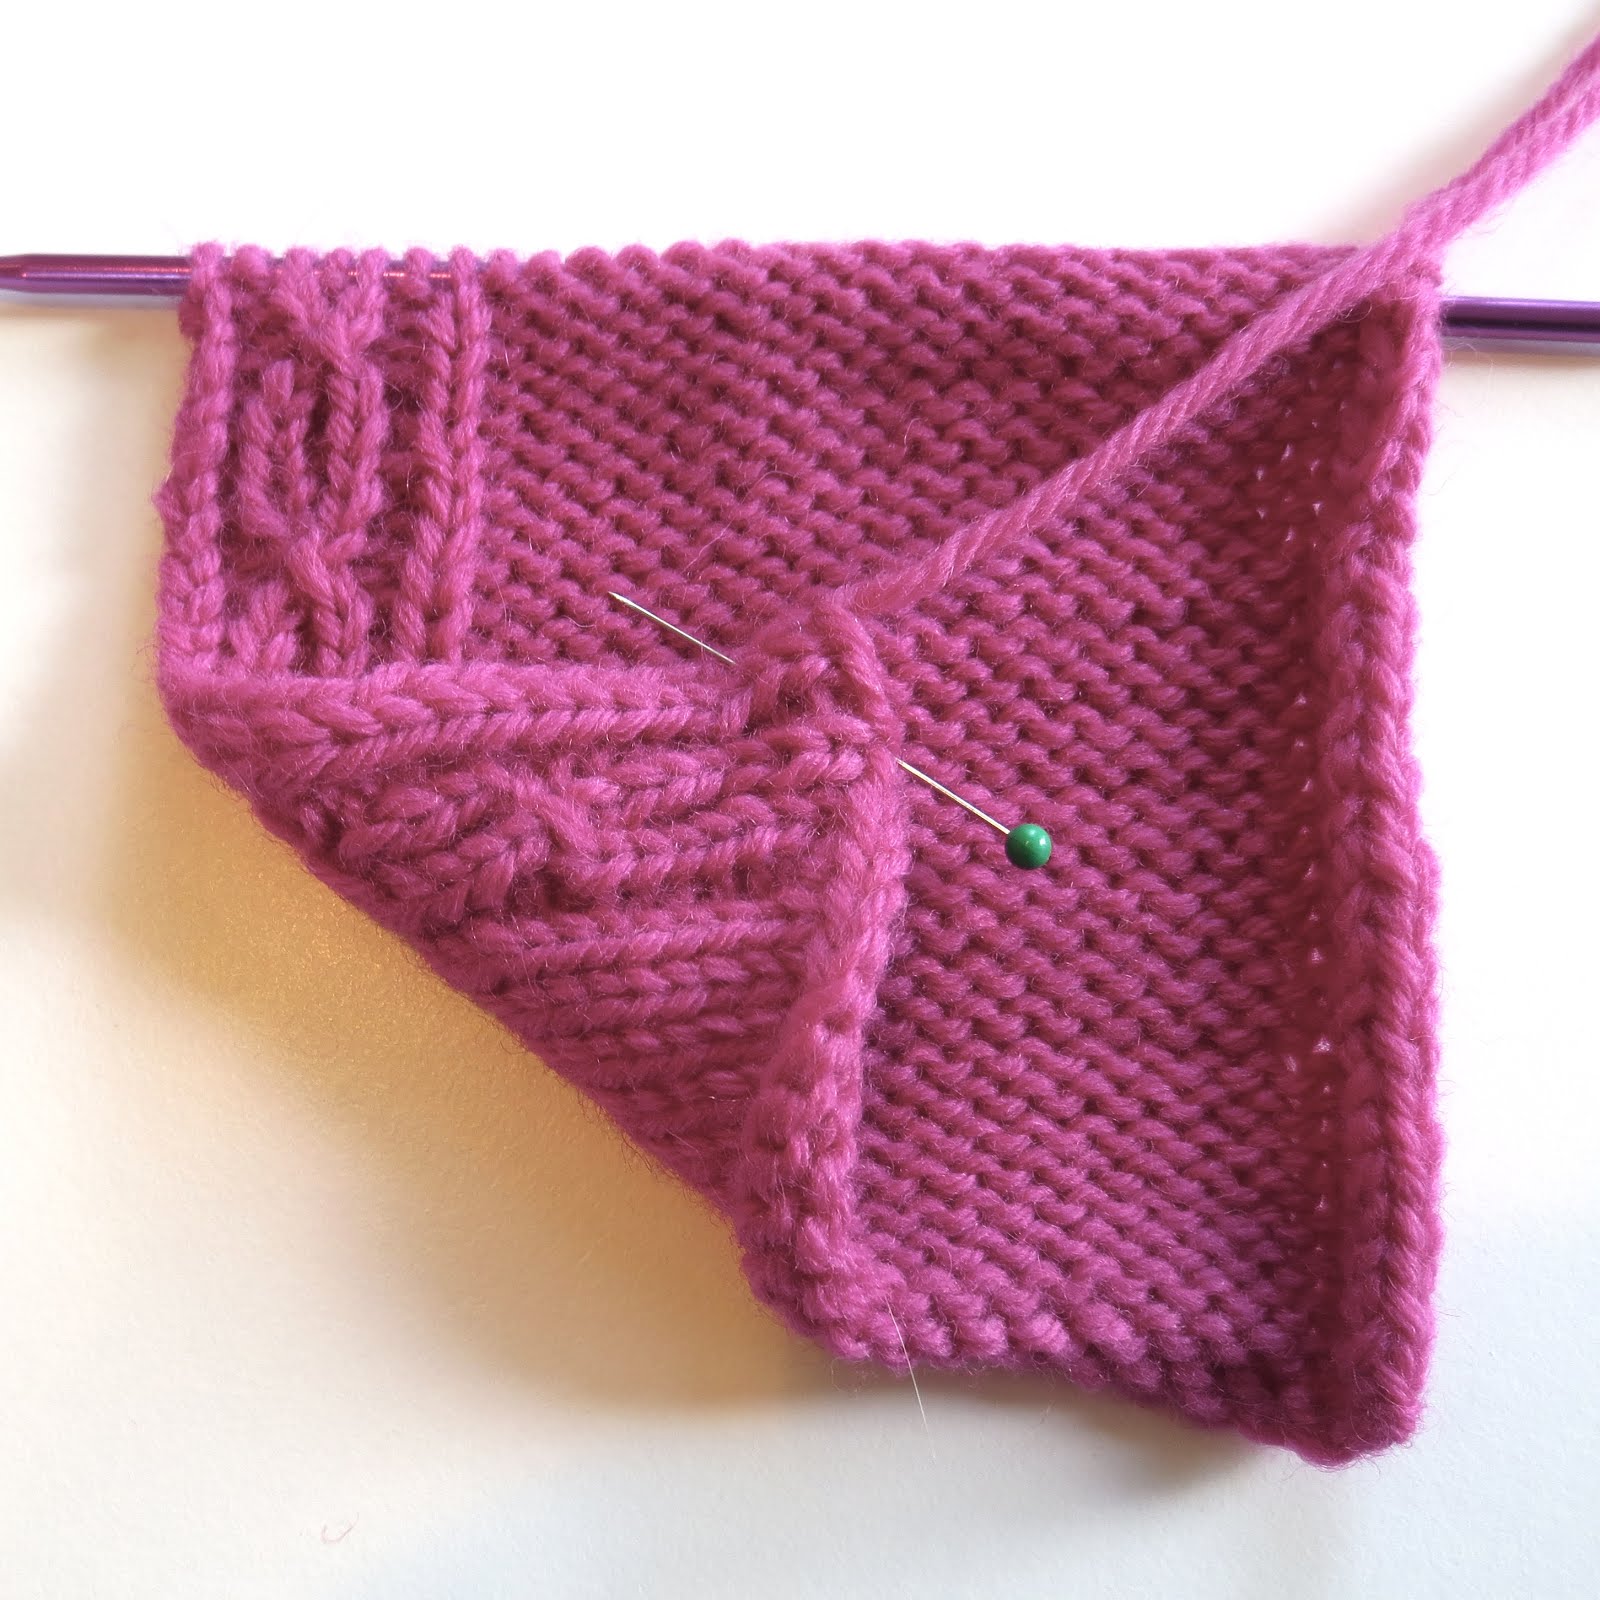 TECHknitting: Afterthought reversible cable-ette border